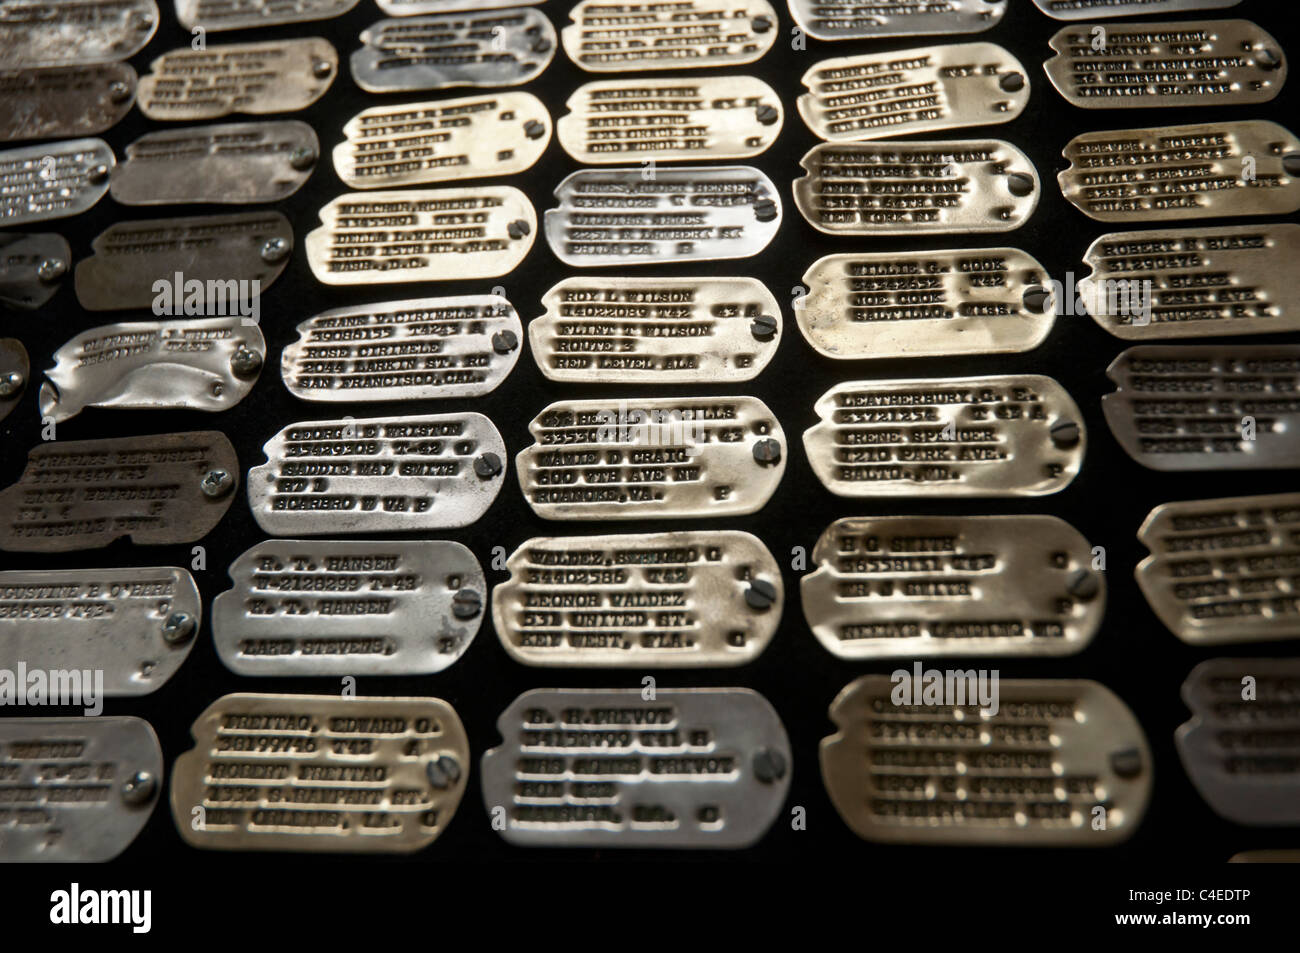 Florida Panhandle Carrabelle.  Collection of old military dog tags at Camp Gordon Johnston World War 2 Museum. Stock Photo